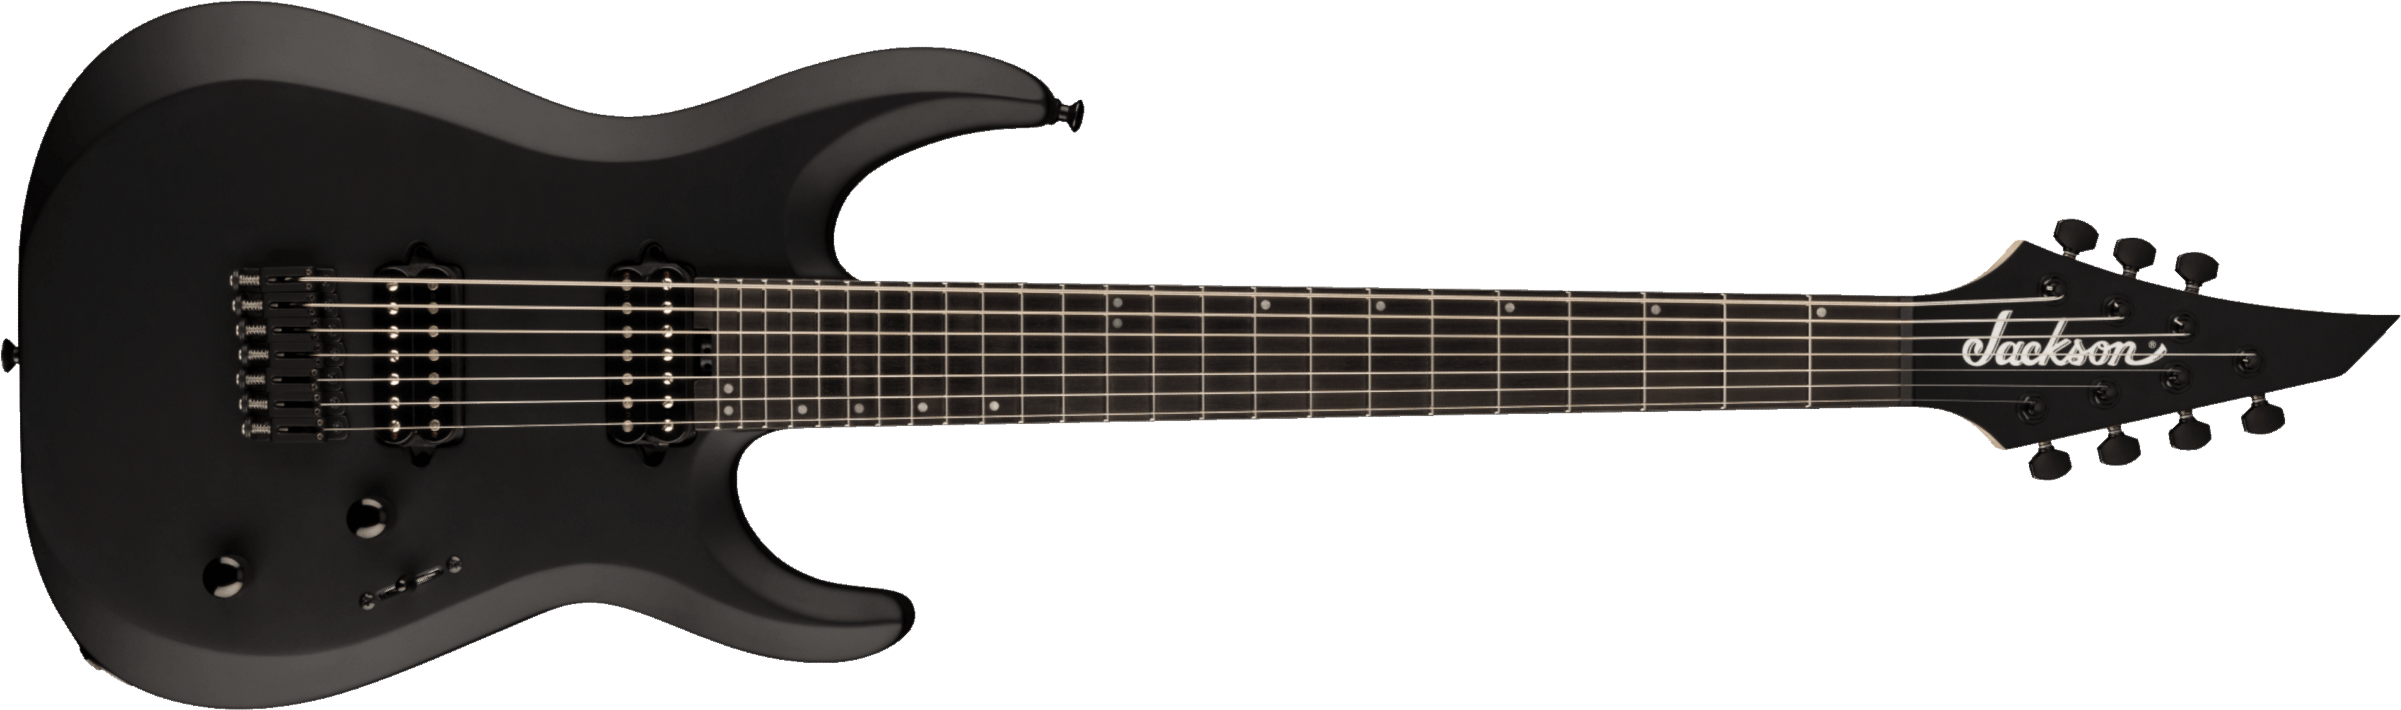 Jackson Dinky Mdk Ht7 Pro Plus 2h Bare Knuckle Eb - Satin Black - 7 string electric guitar - Main picture